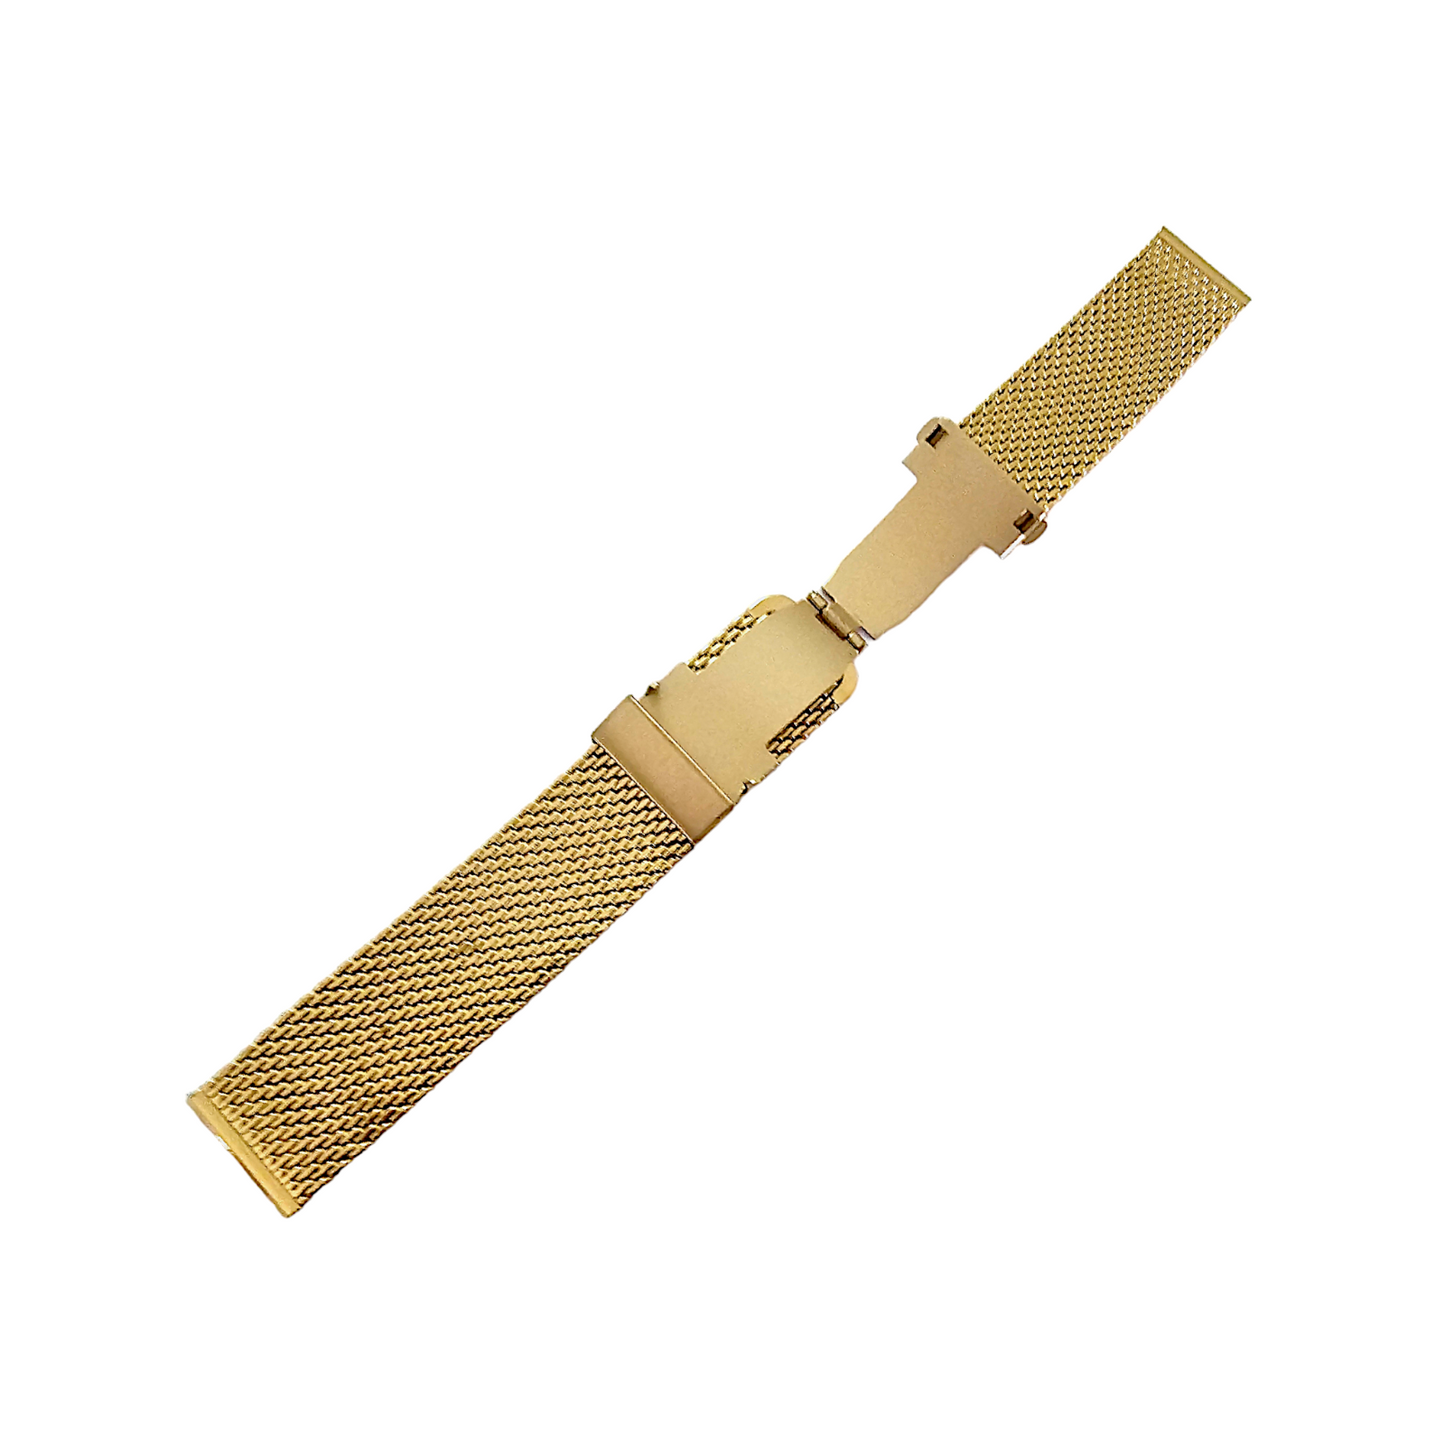 Shark Mesh High Quality 2.7mm Thick Milanese Watch Strap Band Gold 18 20 22 mm